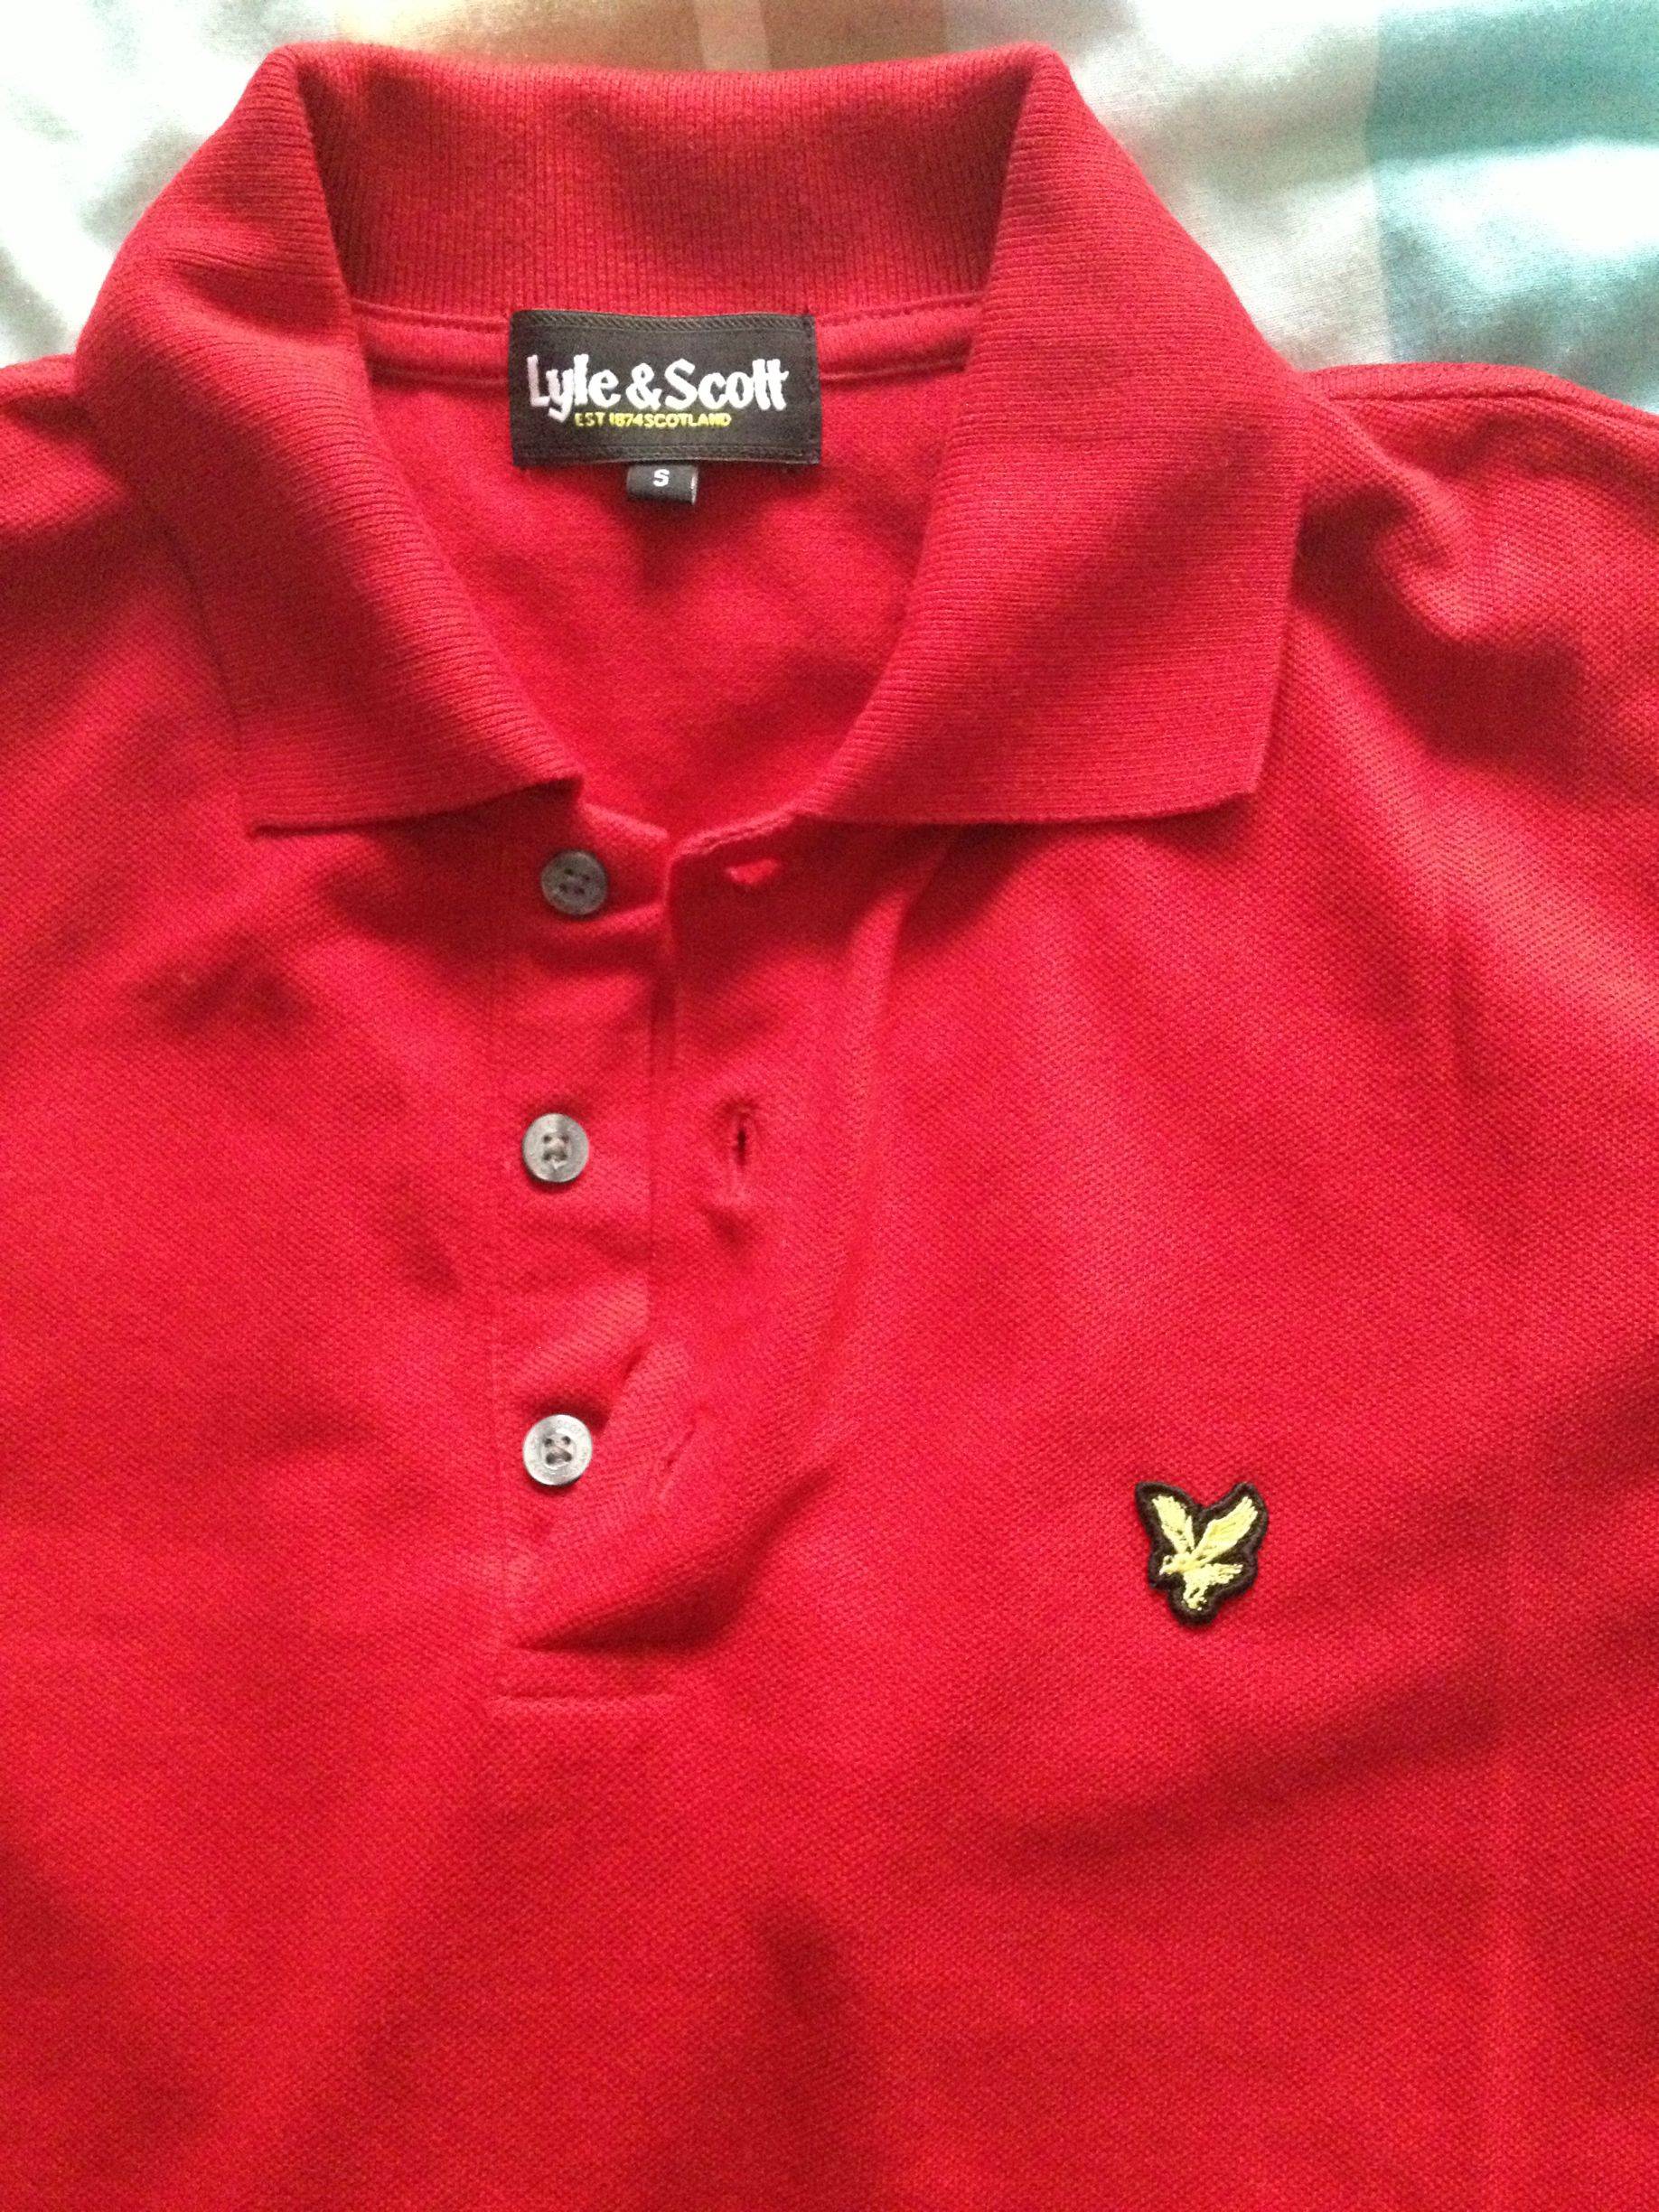 Pictures] Is This a Genuine Lyle & Scott Polo Shirt? | Styleforum